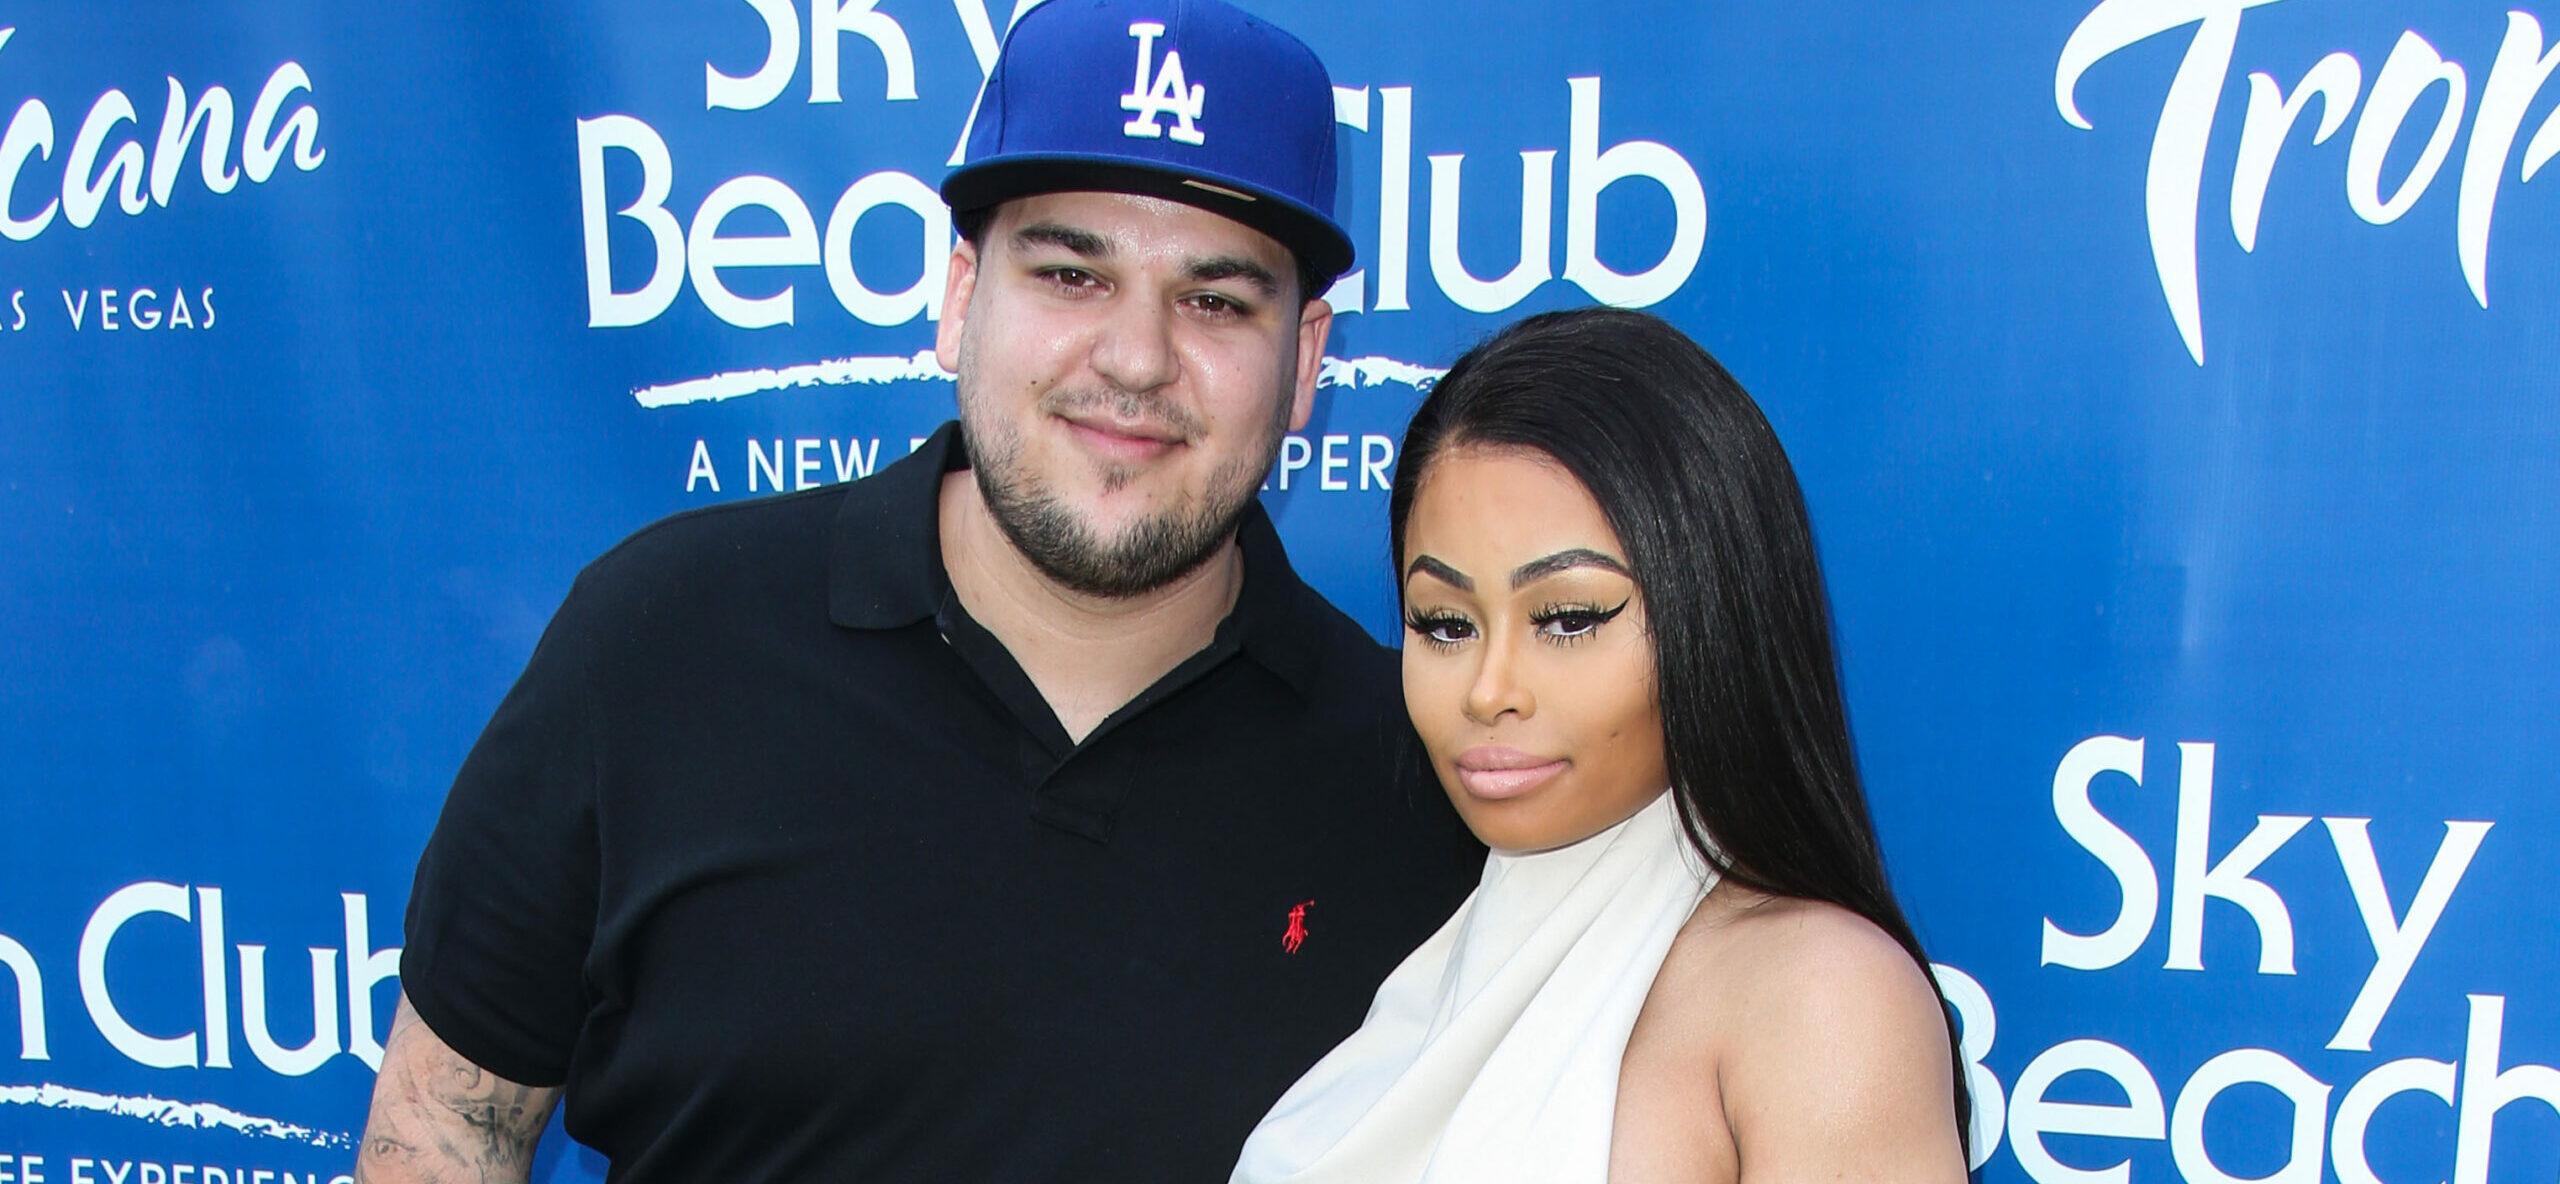 Blac Chyna Accuses Rob Kardashian Of Being ‘Verbally Abusive’ And ‘Threatening’